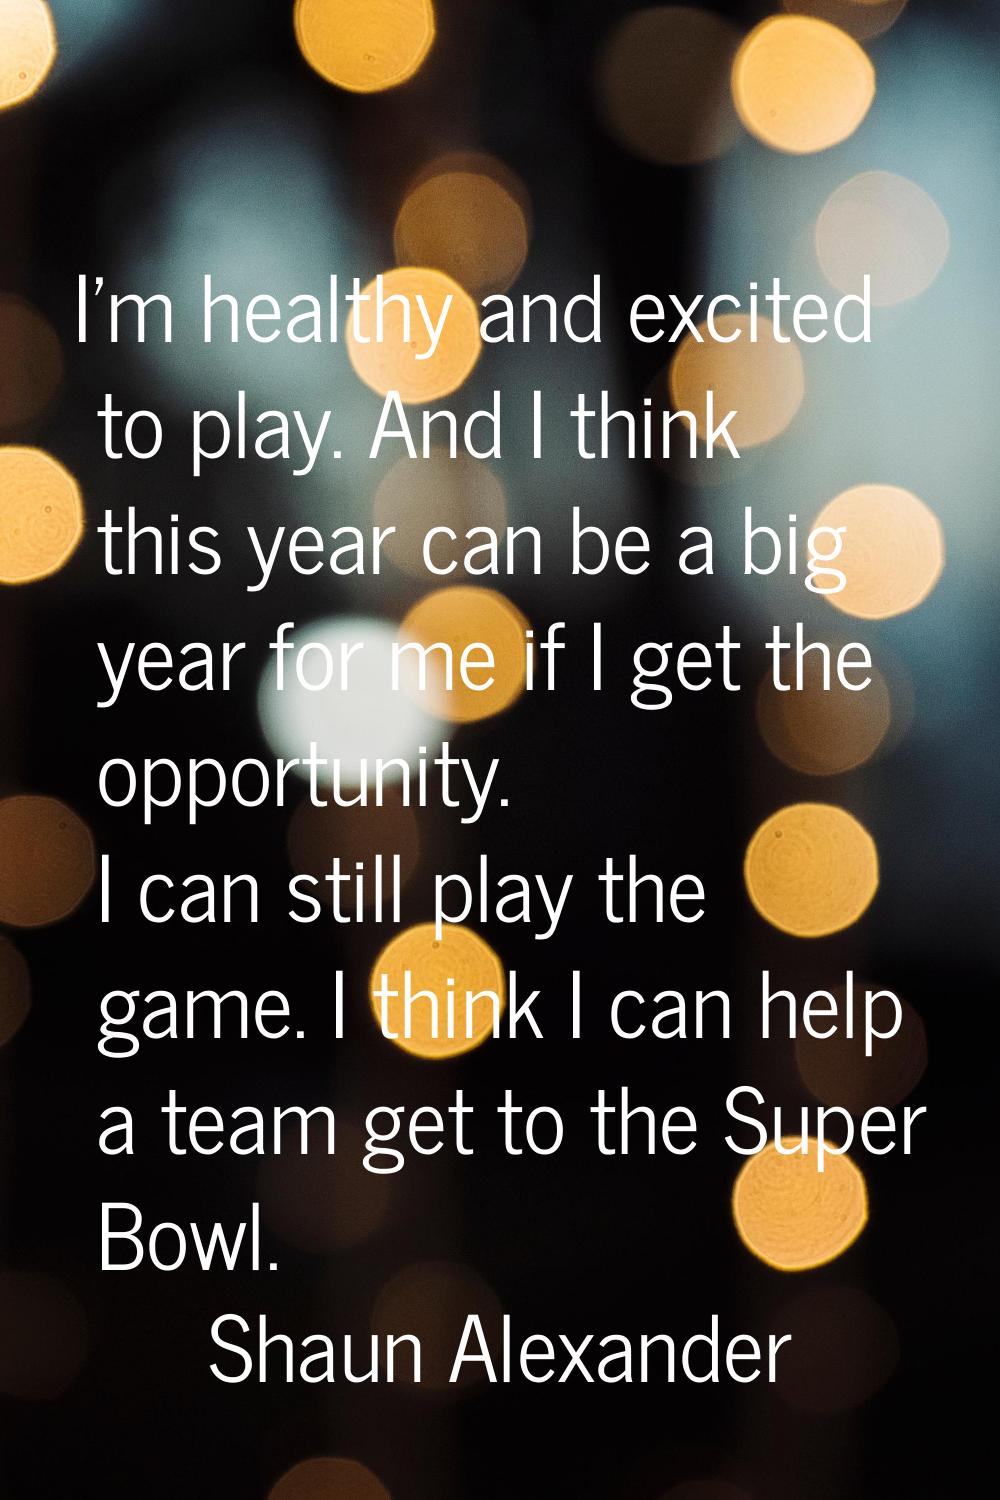 I'm healthy and excited to play. And I think this year can be a big year for me if I get the opport